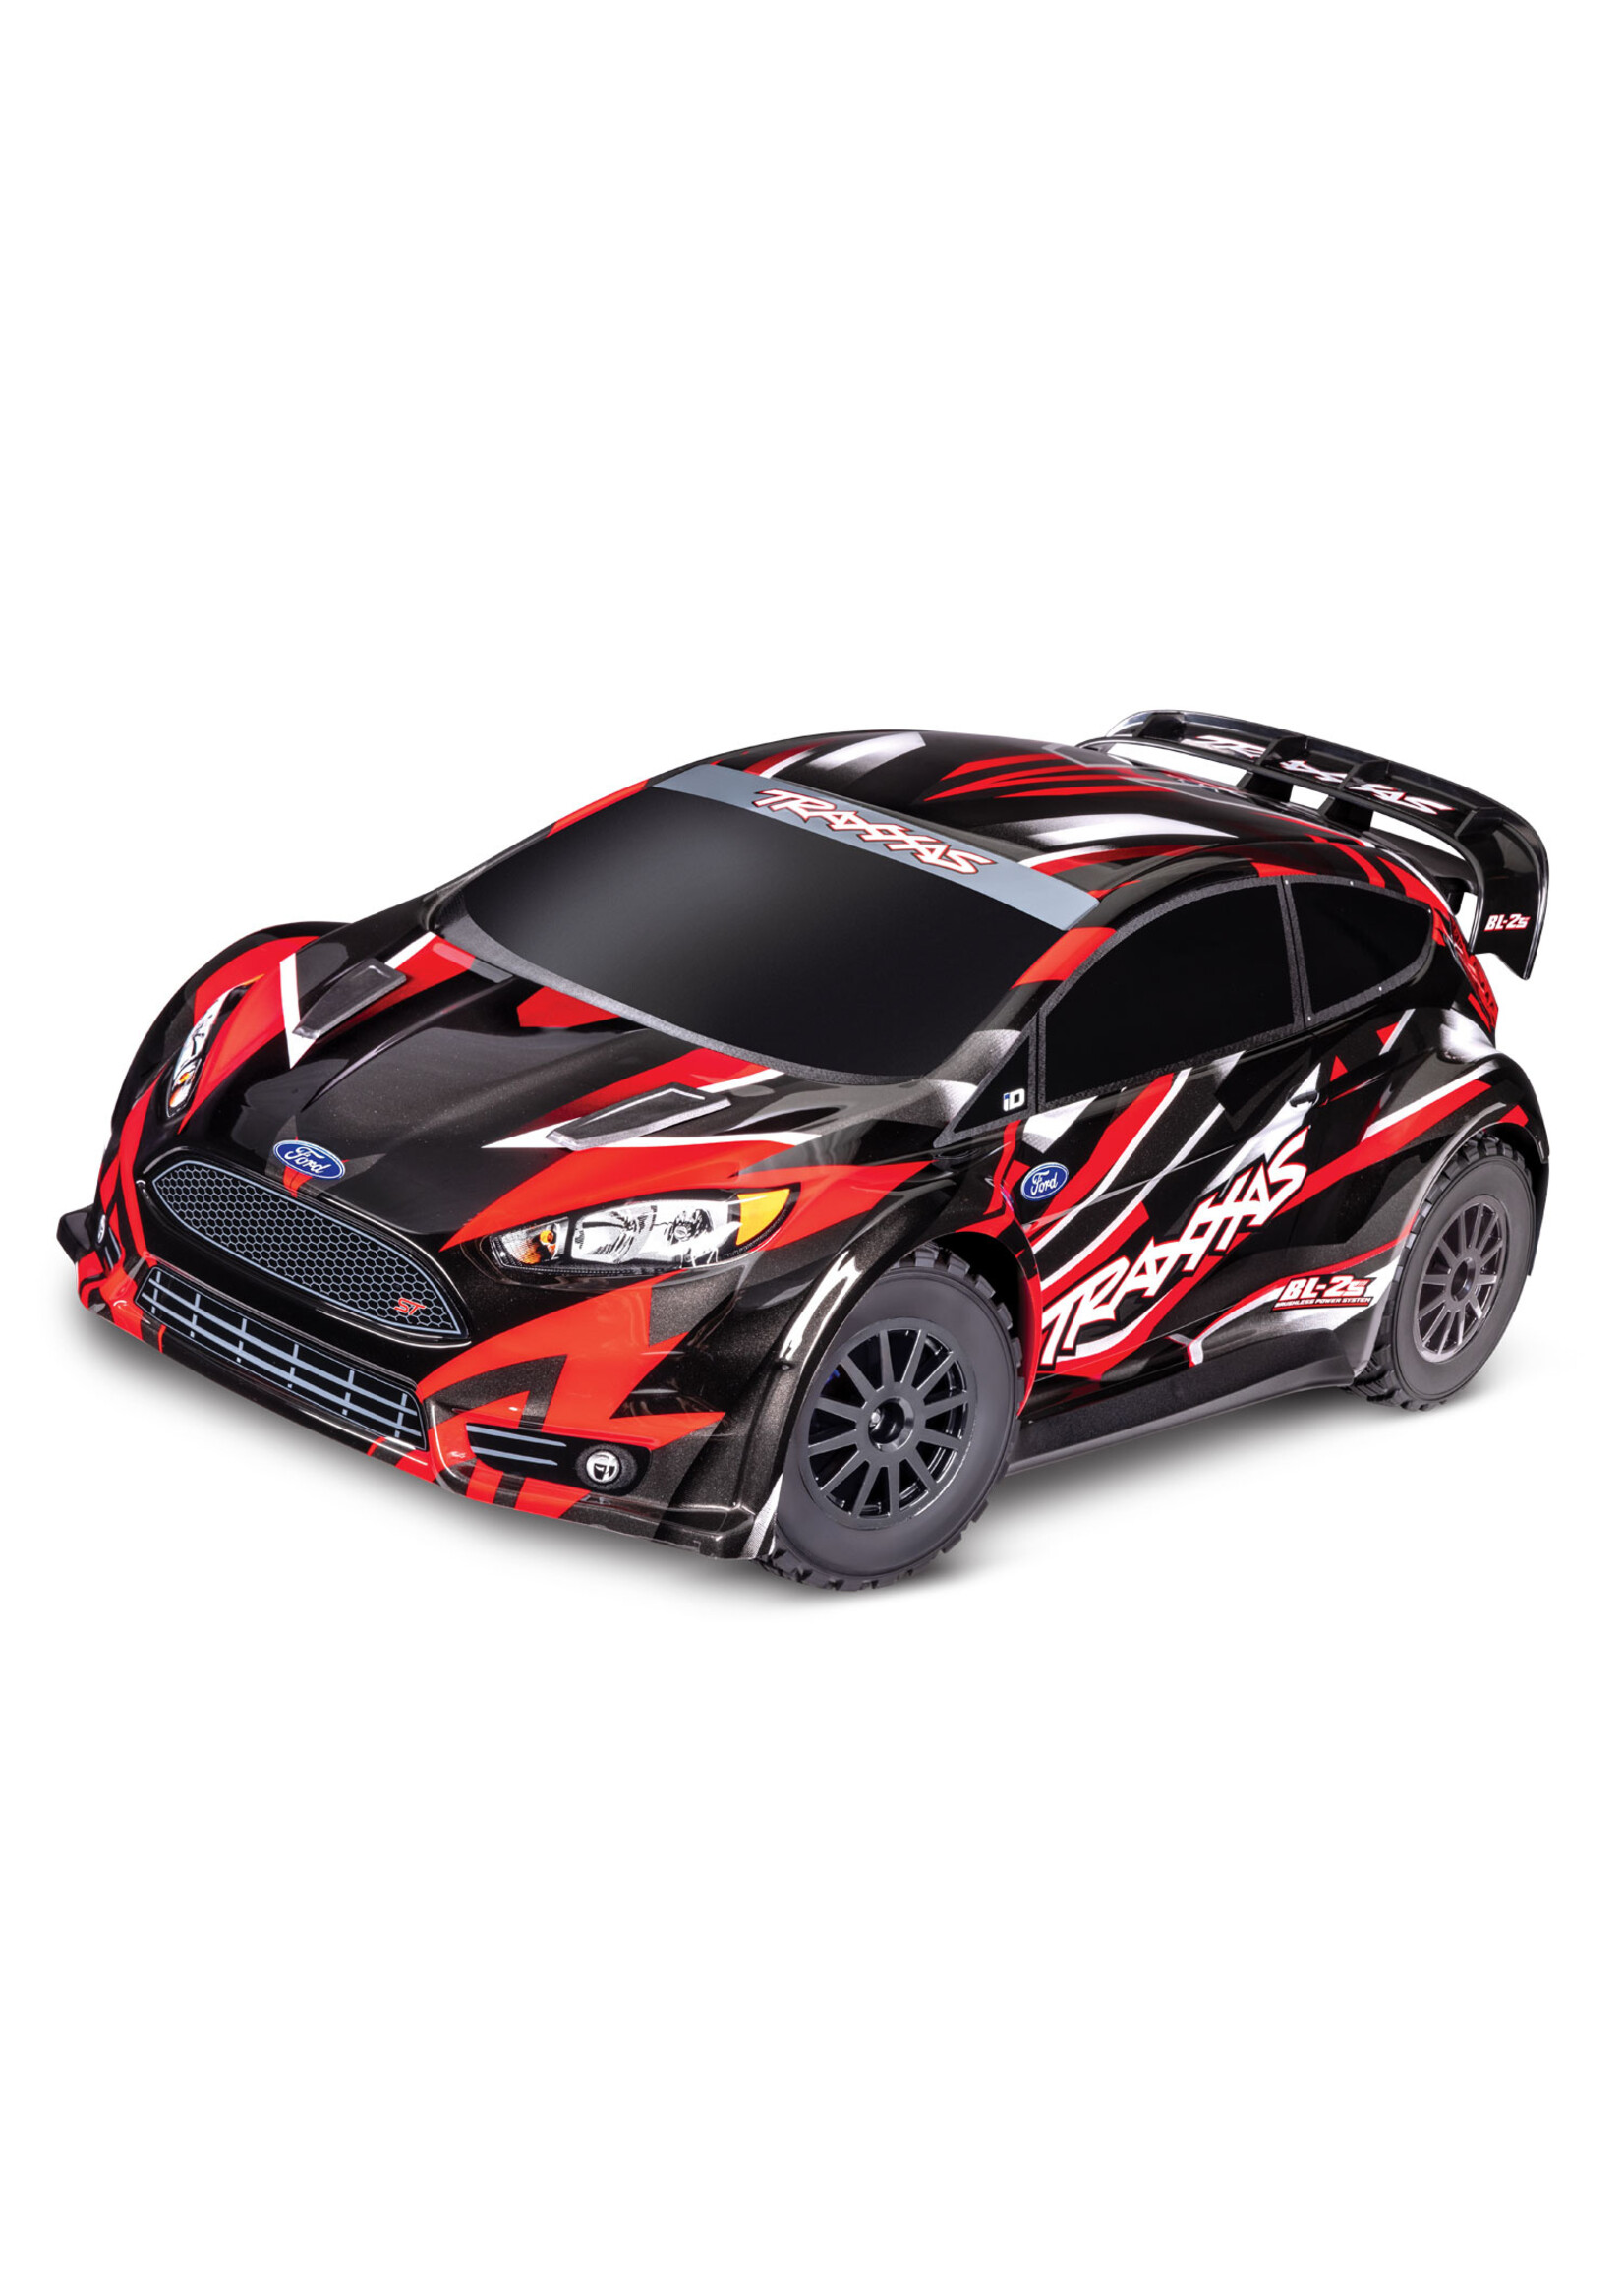 Traxxas 741544RED - 1/10 Ford Fiesta ST Rally - Red